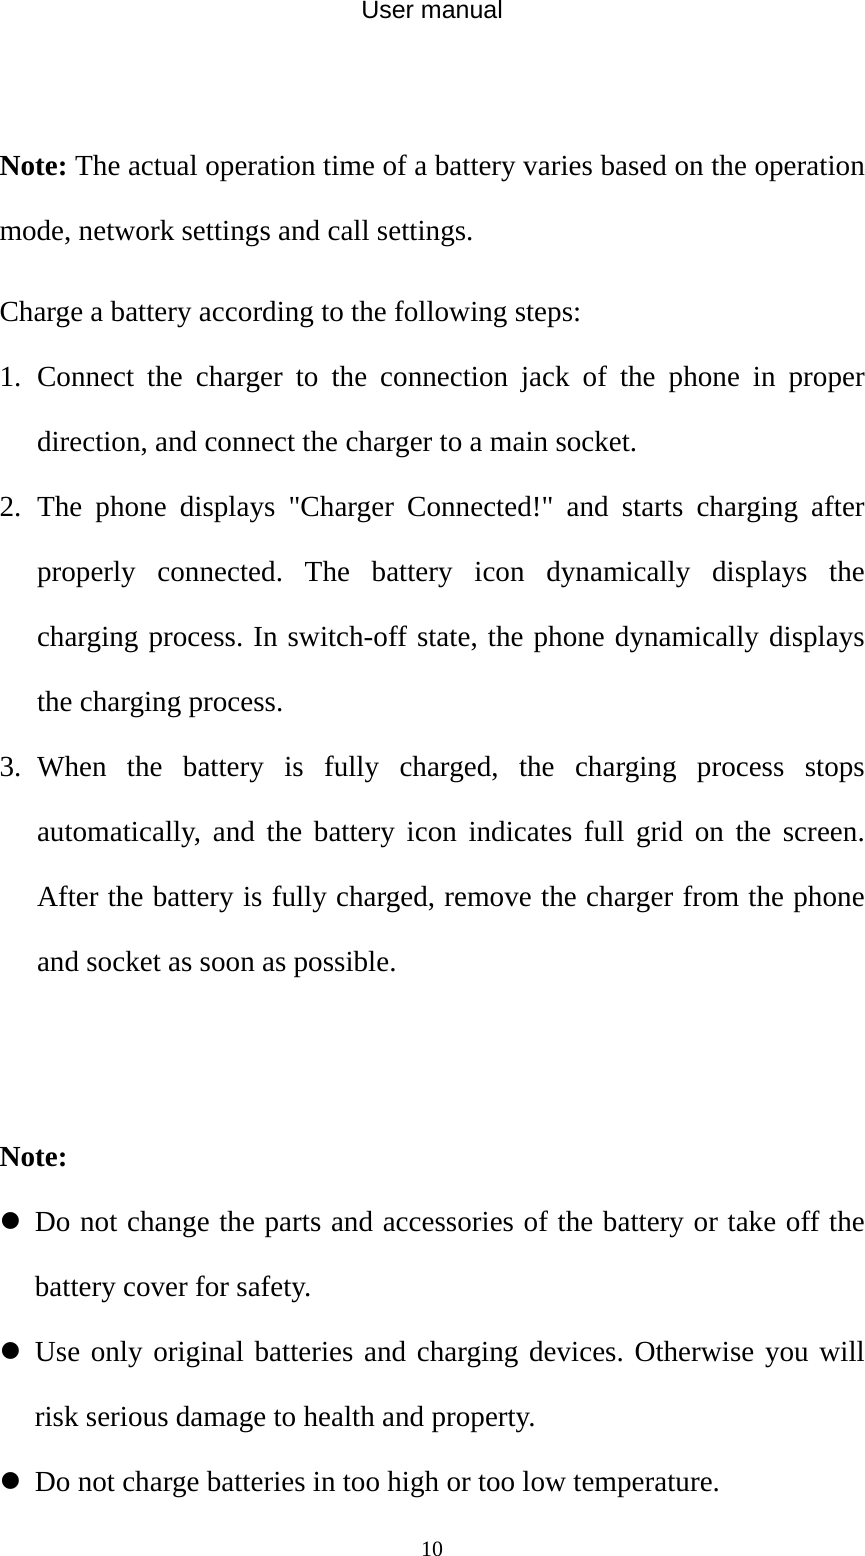 User manual  10 Note: The actual operation time of a battery varies based on the operation mode, network settings and call settings. Charge a battery according to the following steps: 1. Connect the charger to the connection jack of the phone in proper direction, and connect the charger to a main socket. 2. The phone displays &quot;Charger Connected!&quot; and starts charging after properly connected. The battery icon dynamically displays the charging process. In switch-off state, the phone dynamically displays the charging process. 3. When the battery is fully charged, the charging process stops automatically, and the battery icon indicates full grid on the screen. After the battery is fully charged, remove the charger from the phone and socket as soon as possible.   Note: z Do not change the parts and accessories of the battery or take off the battery cover for safety. z Use only original batteries and charging devices. Otherwise you will risk serious damage to health and property. z Do not charge batteries in too high or too low temperature. 